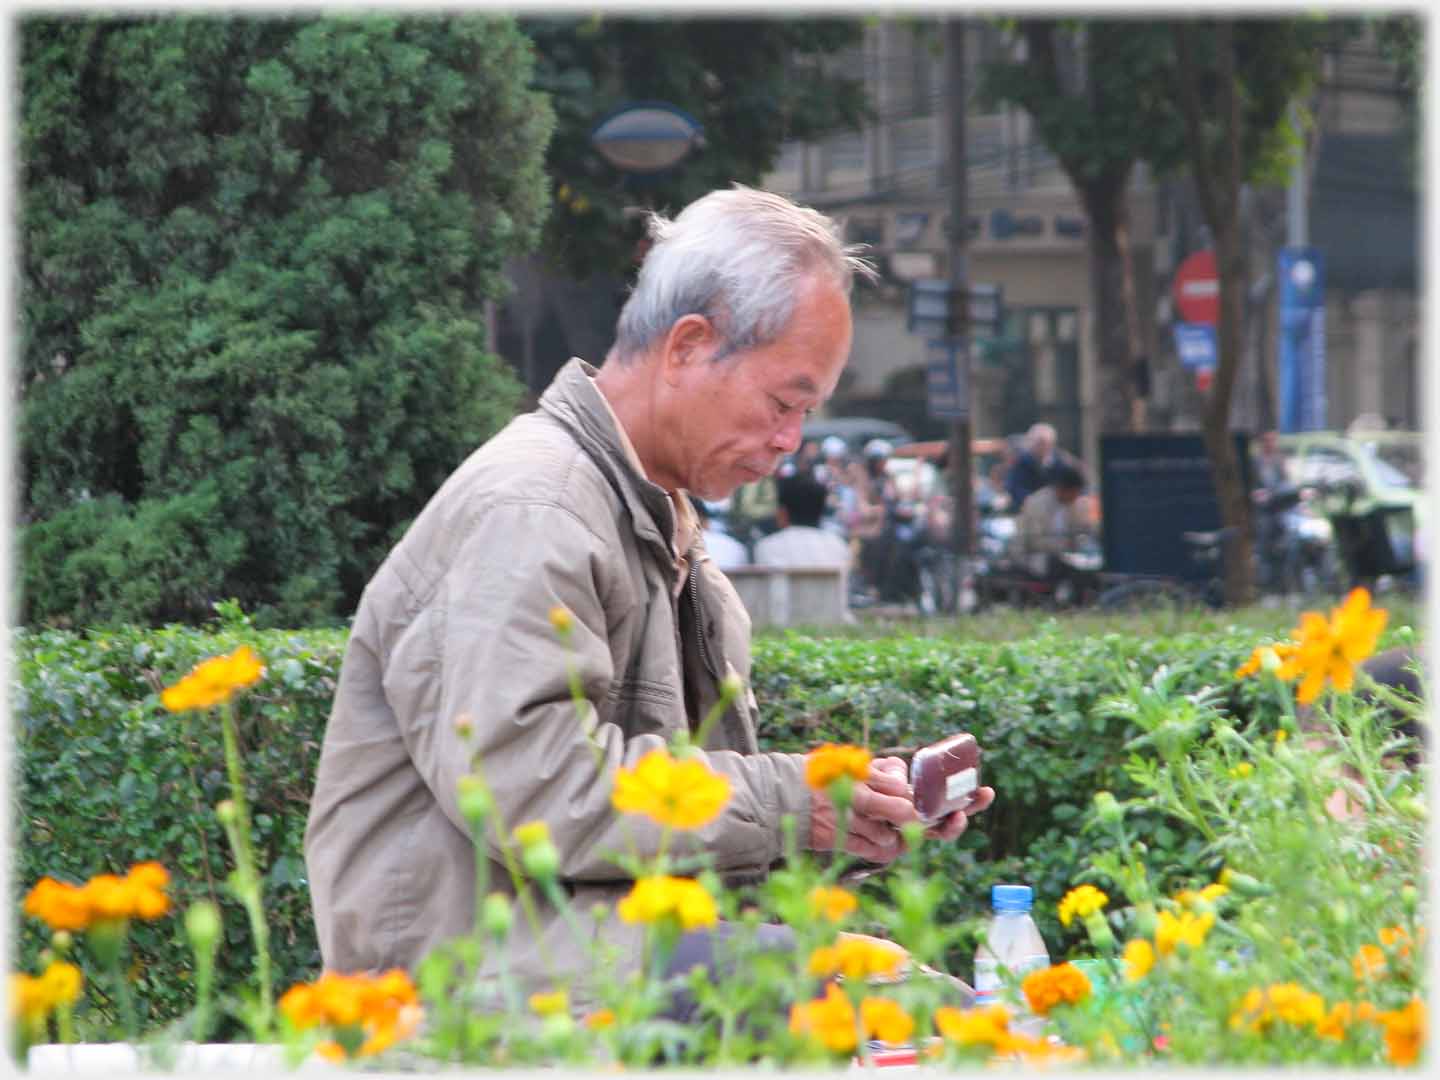 Man examining a spectacle case behind a row of flowers.